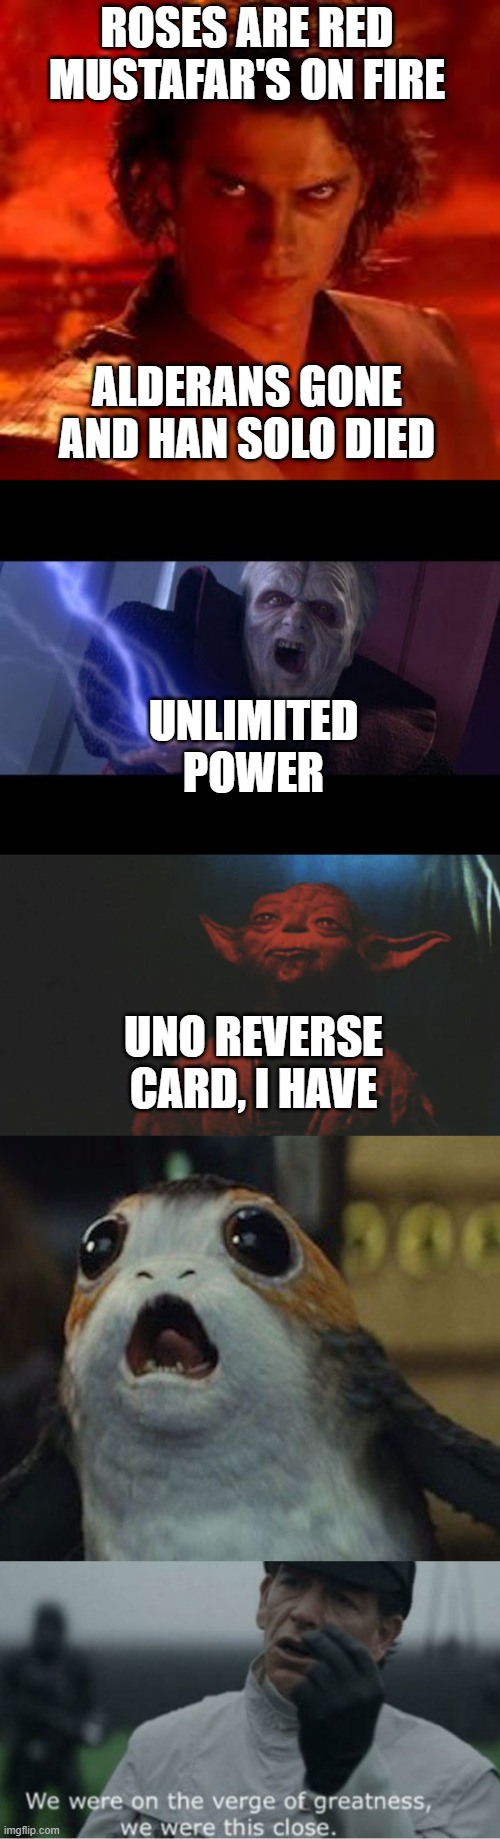 STAR WARS IN A NUTSHELL | ROSES ARE RED
MUSTAFAR'S ON FIRE; ALDERANS GONE
AND HAN SOLO DIED; UNLIMITED POWER; UNO REVERSE CARD, I HAVE | image tagged in anakin star wars,unlimited power,there is another,star wars porg,we were on the verge of greatness | made w/ Imgflip meme maker